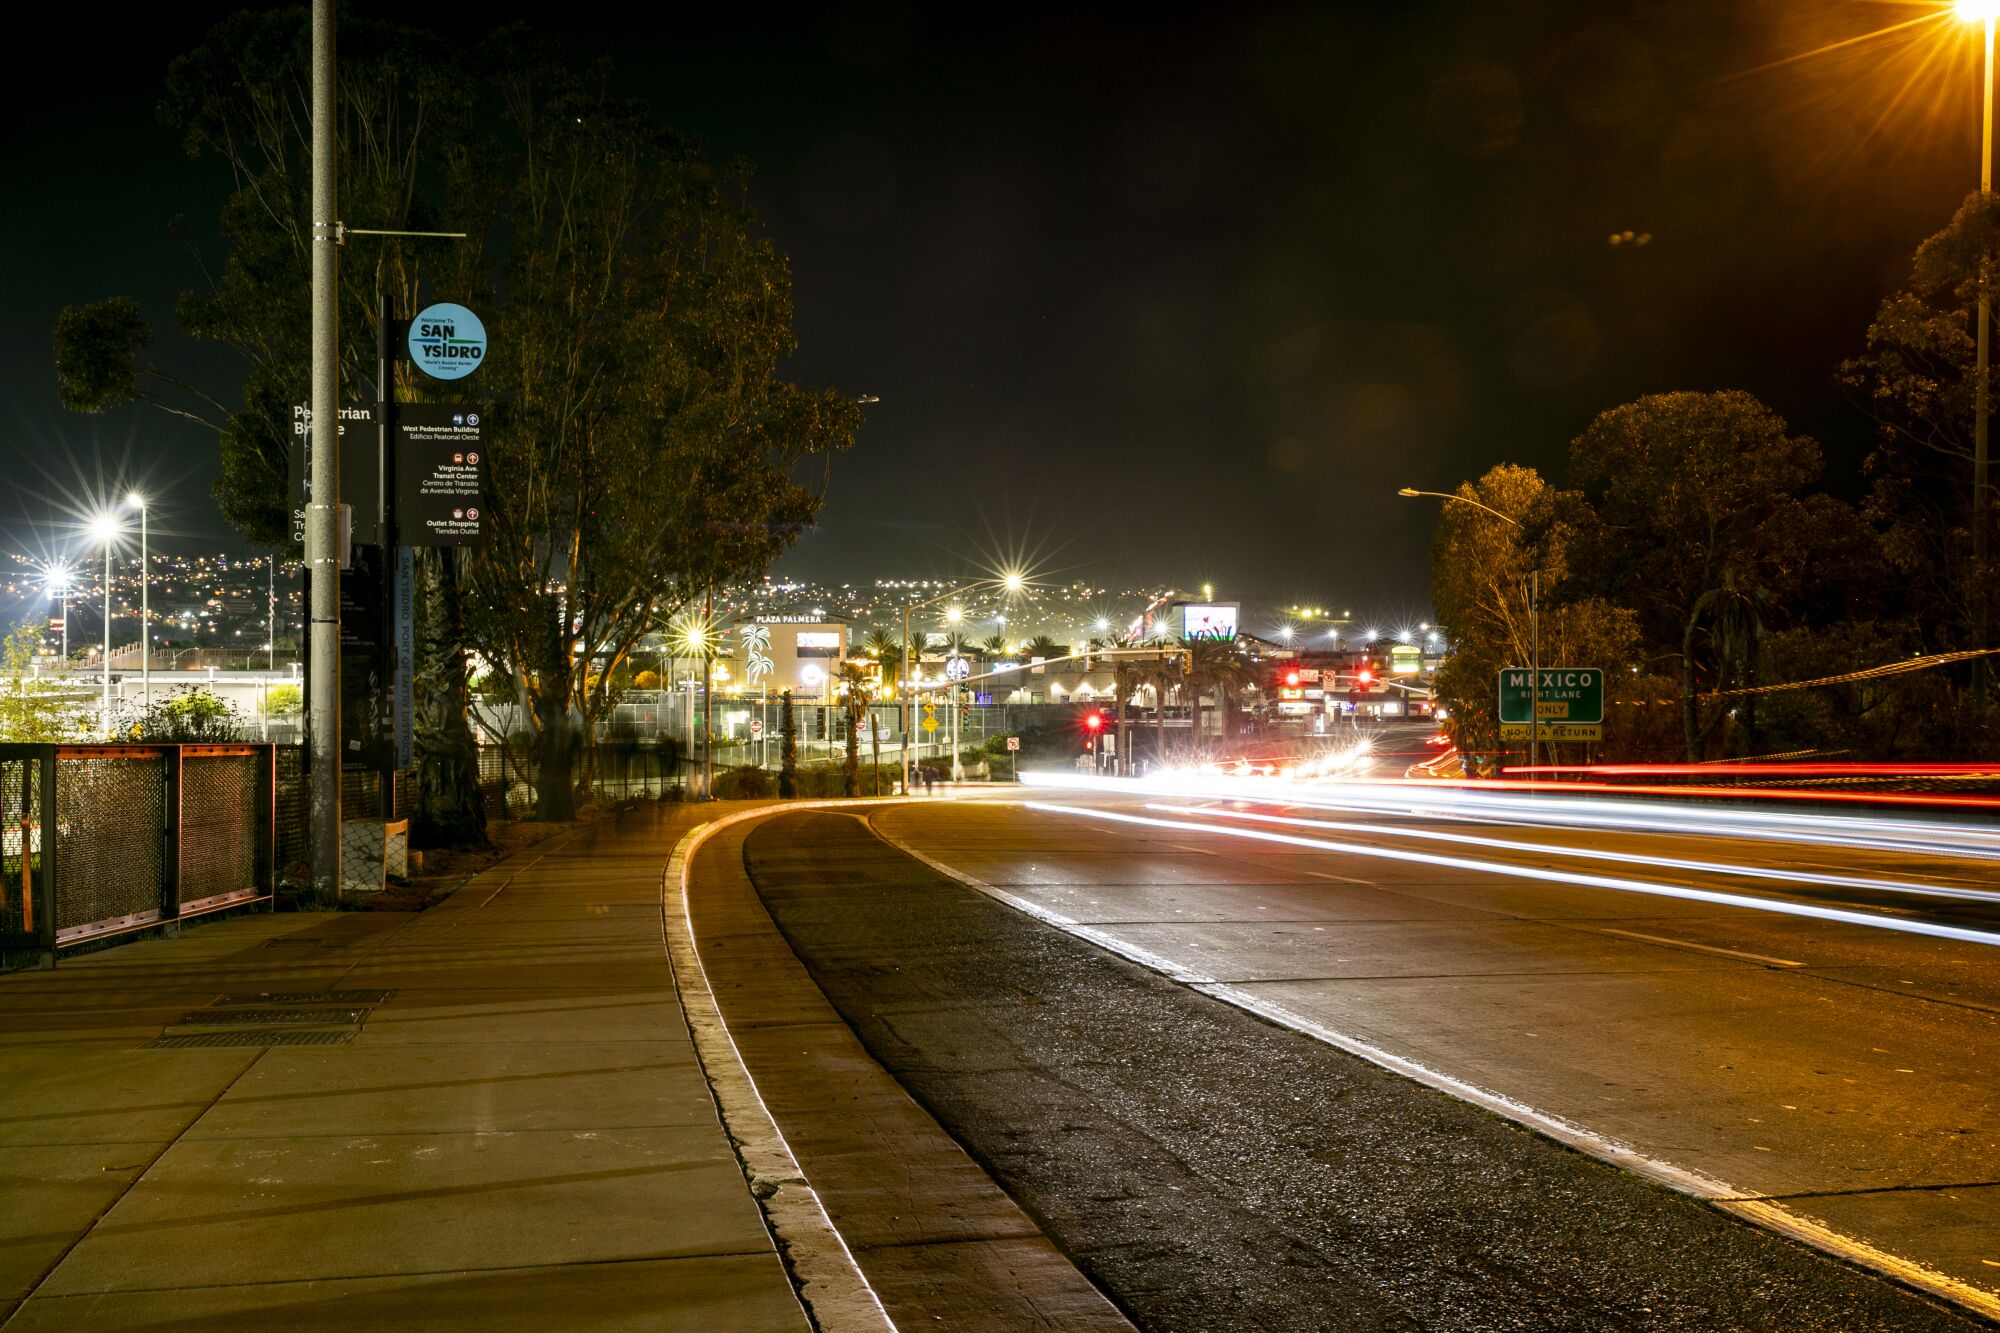 With the hills of Tijuana, Mexico, illuminated in the background, cars speed by along Camino de la Plaza 